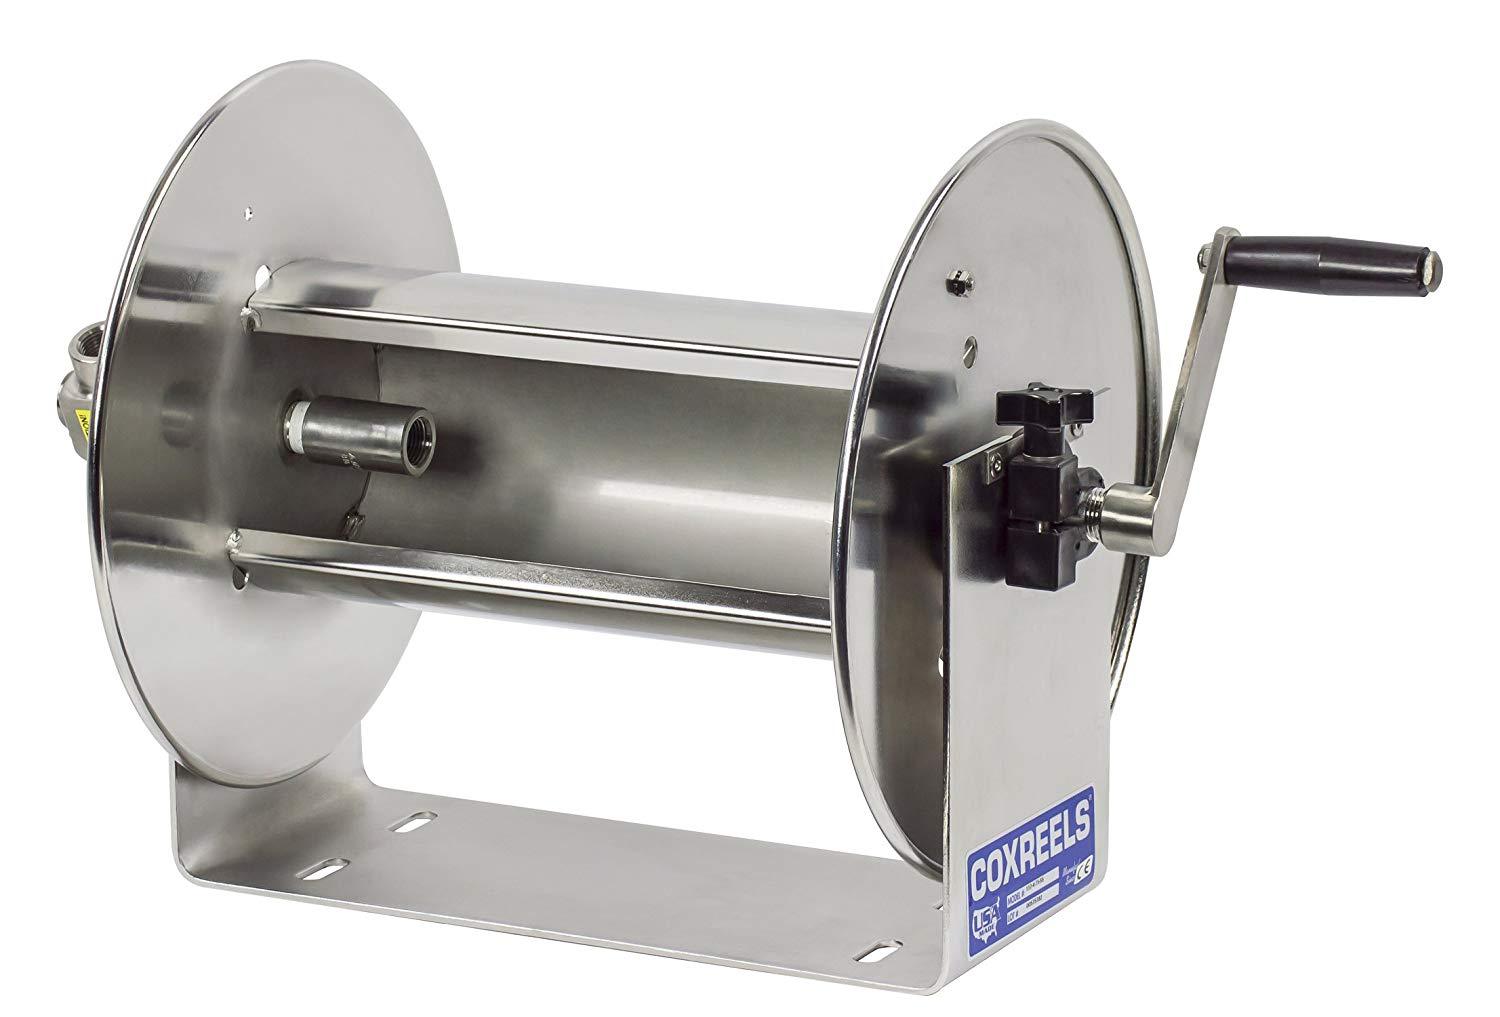 112-4-75-SS : Coxreels 112-4-75-SS Stainless Steel Hand Crank Hose Reel,  1/2 ID, 75' capacity, NO HOSE, 4000psi